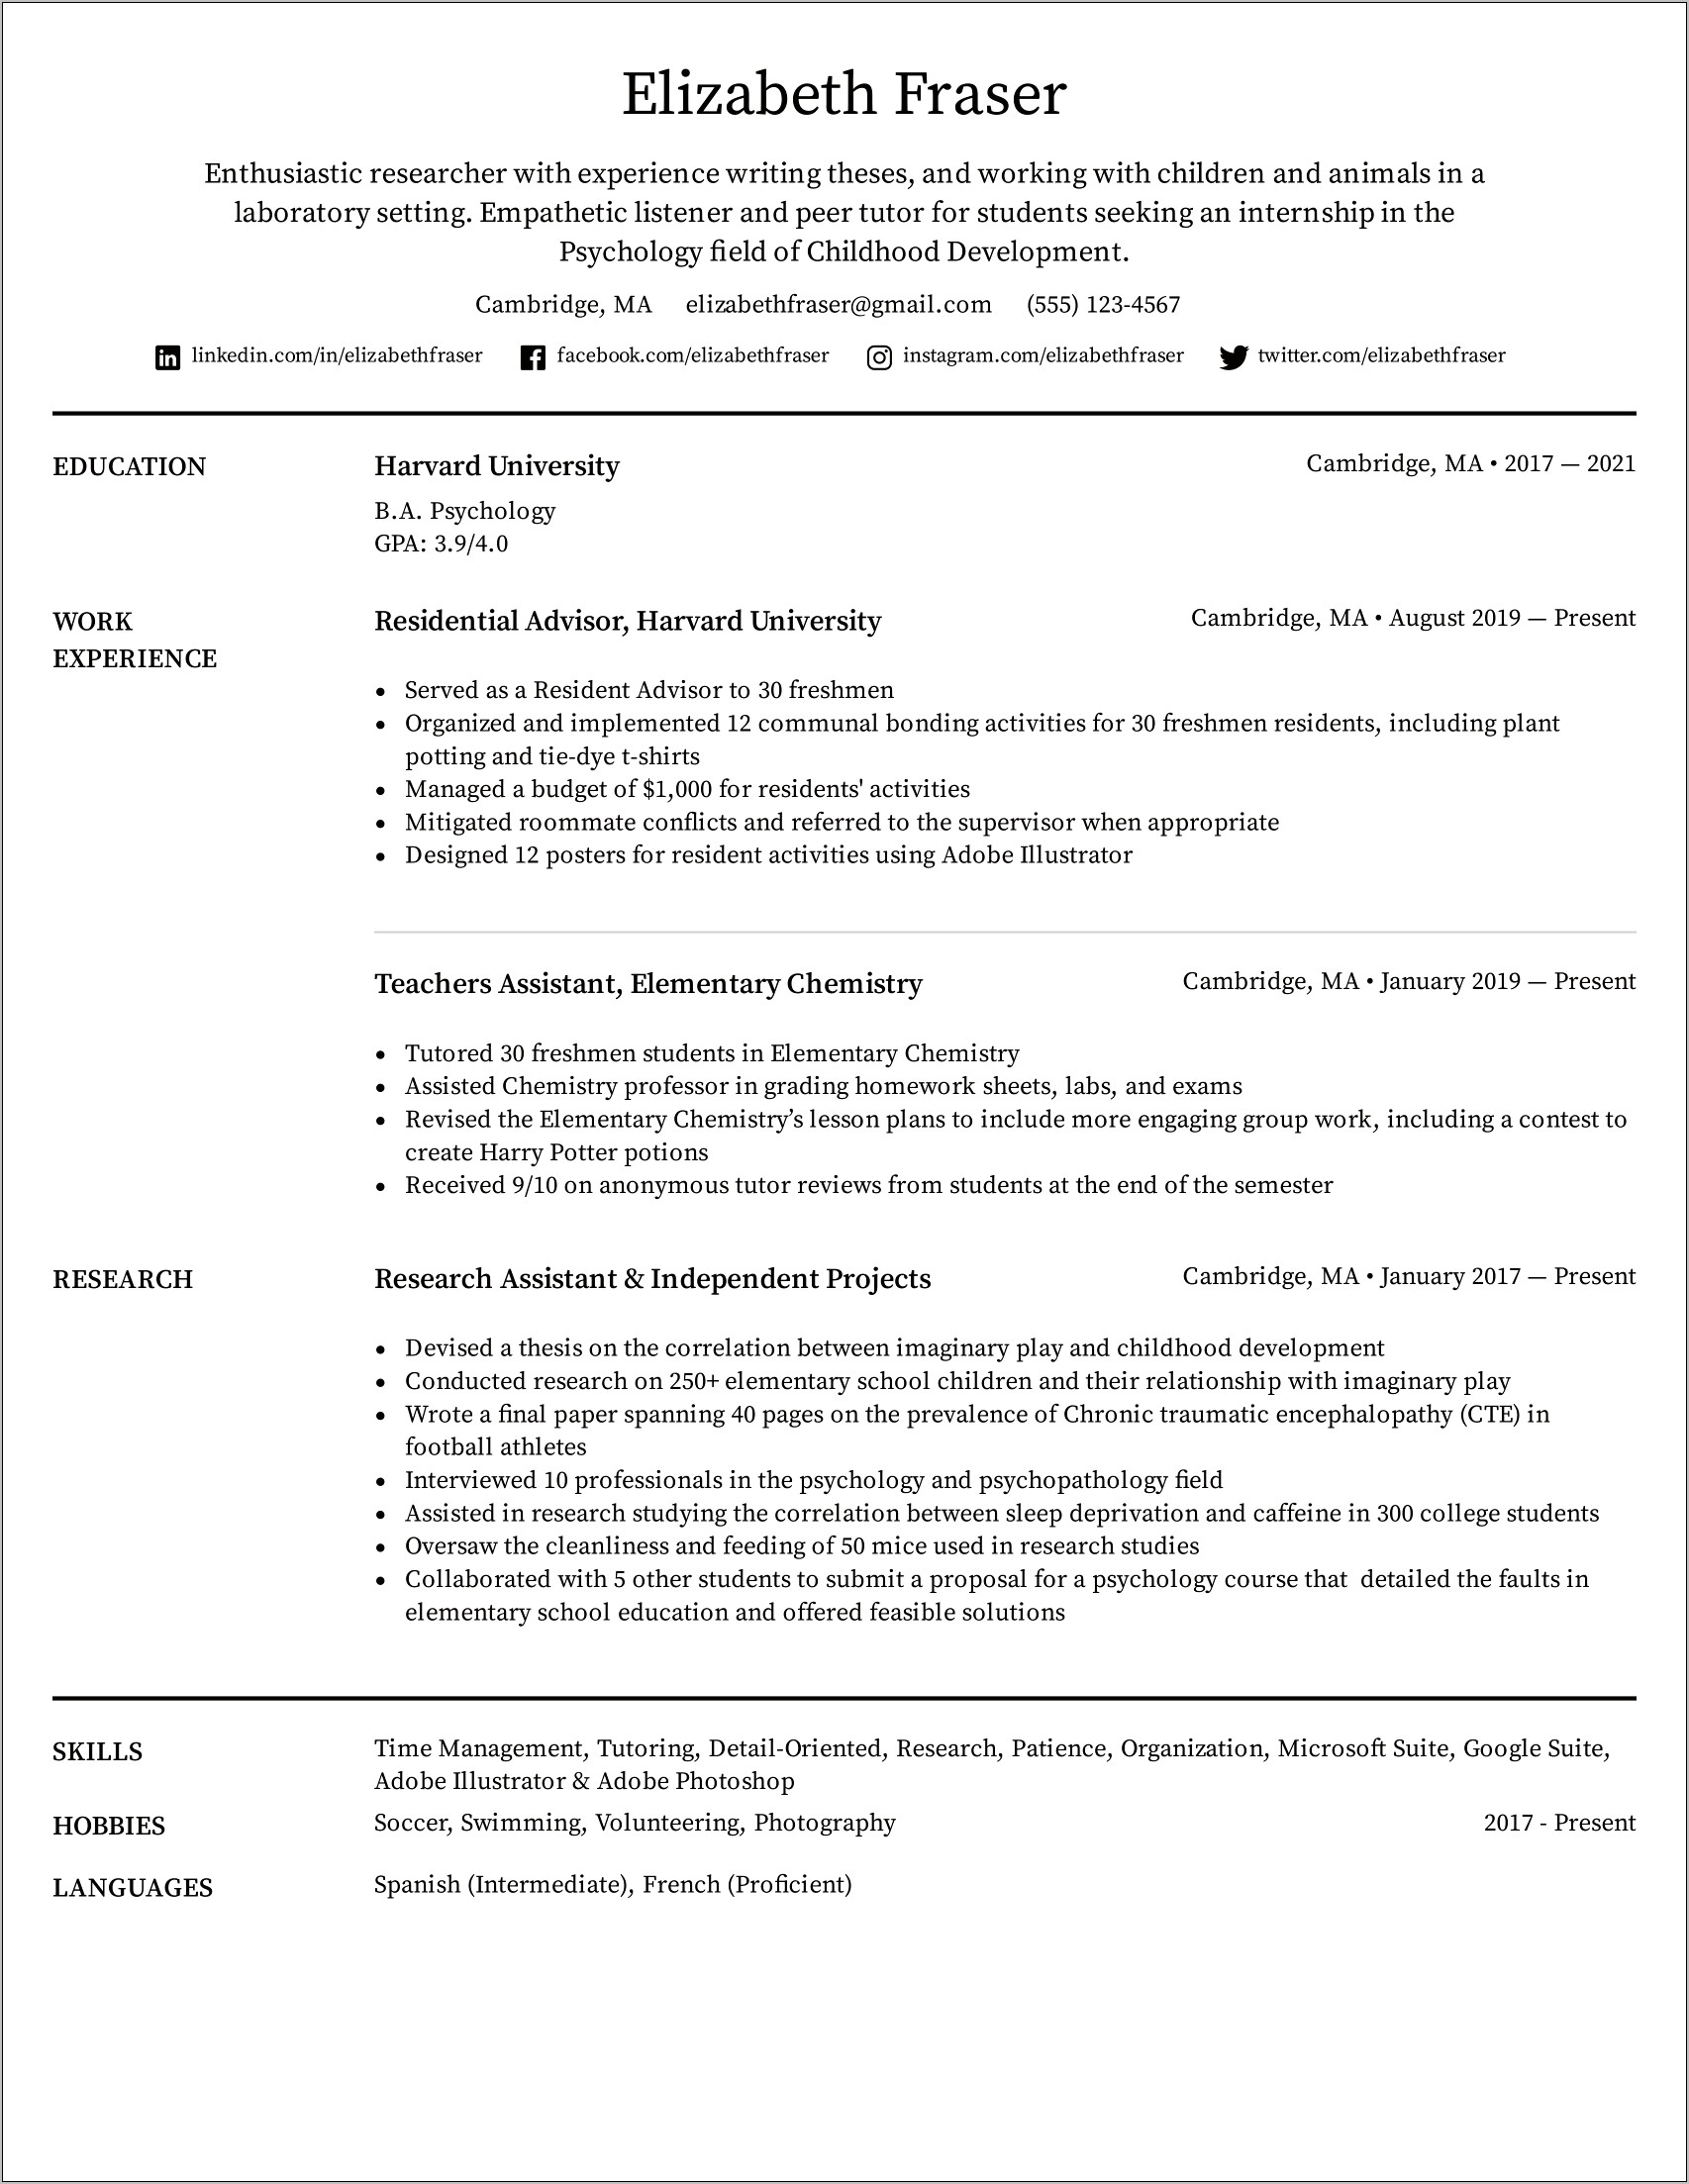 Amazing Resume For College Graduate With Minimal Experience